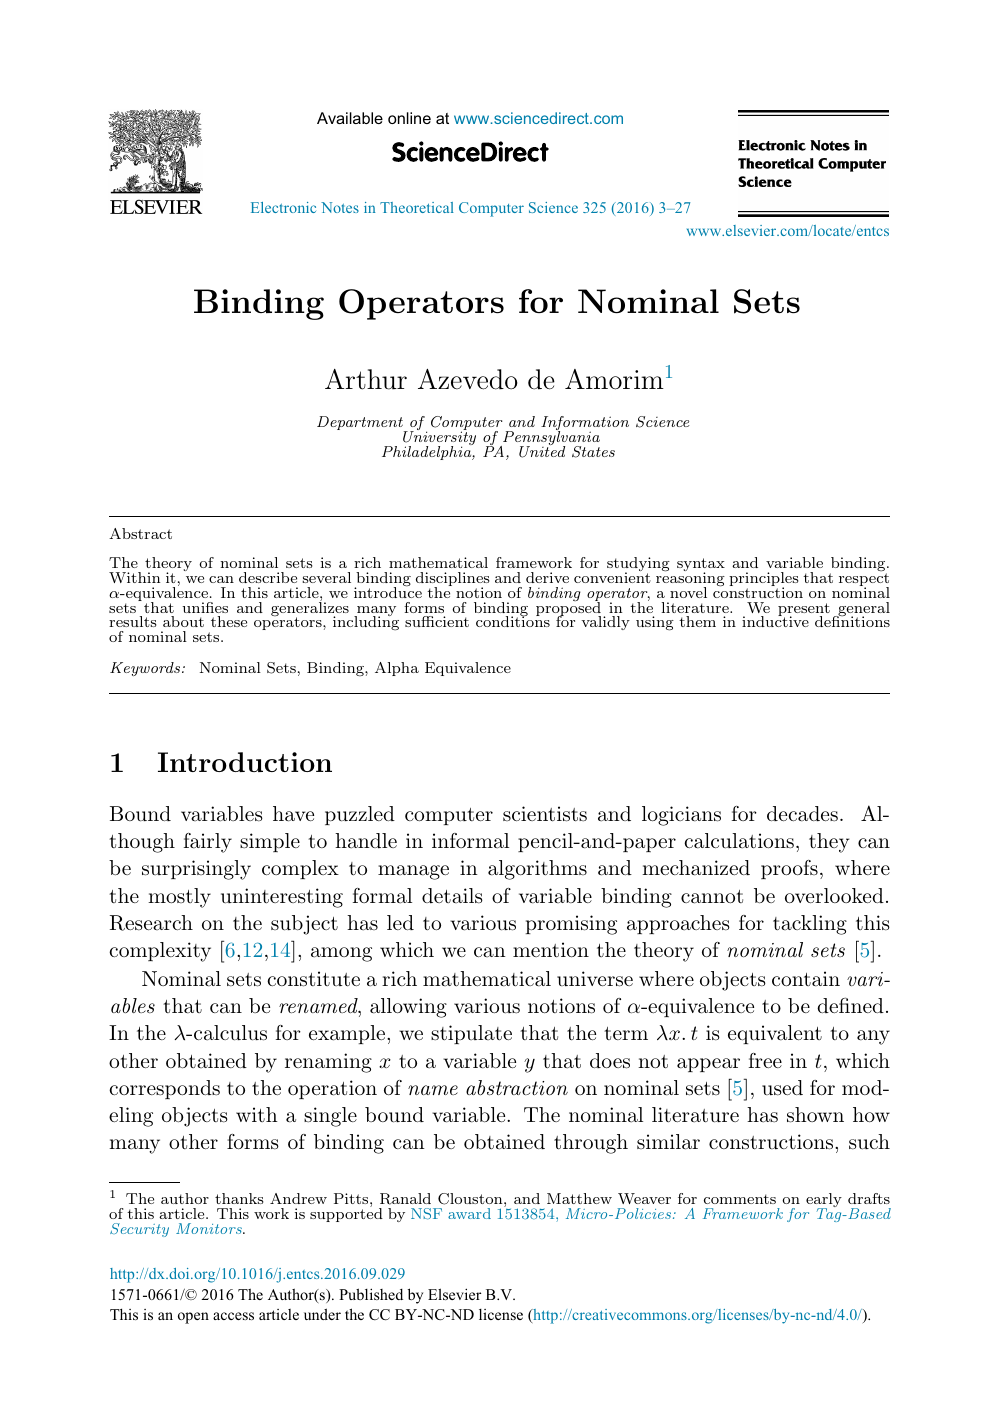 Binding Operators For Nominal Sets Topic Of Research Paper In Computer And Information Sciences Download Scholarly Article Pdf And Read For Free On Cyberleninka Open Science Hub